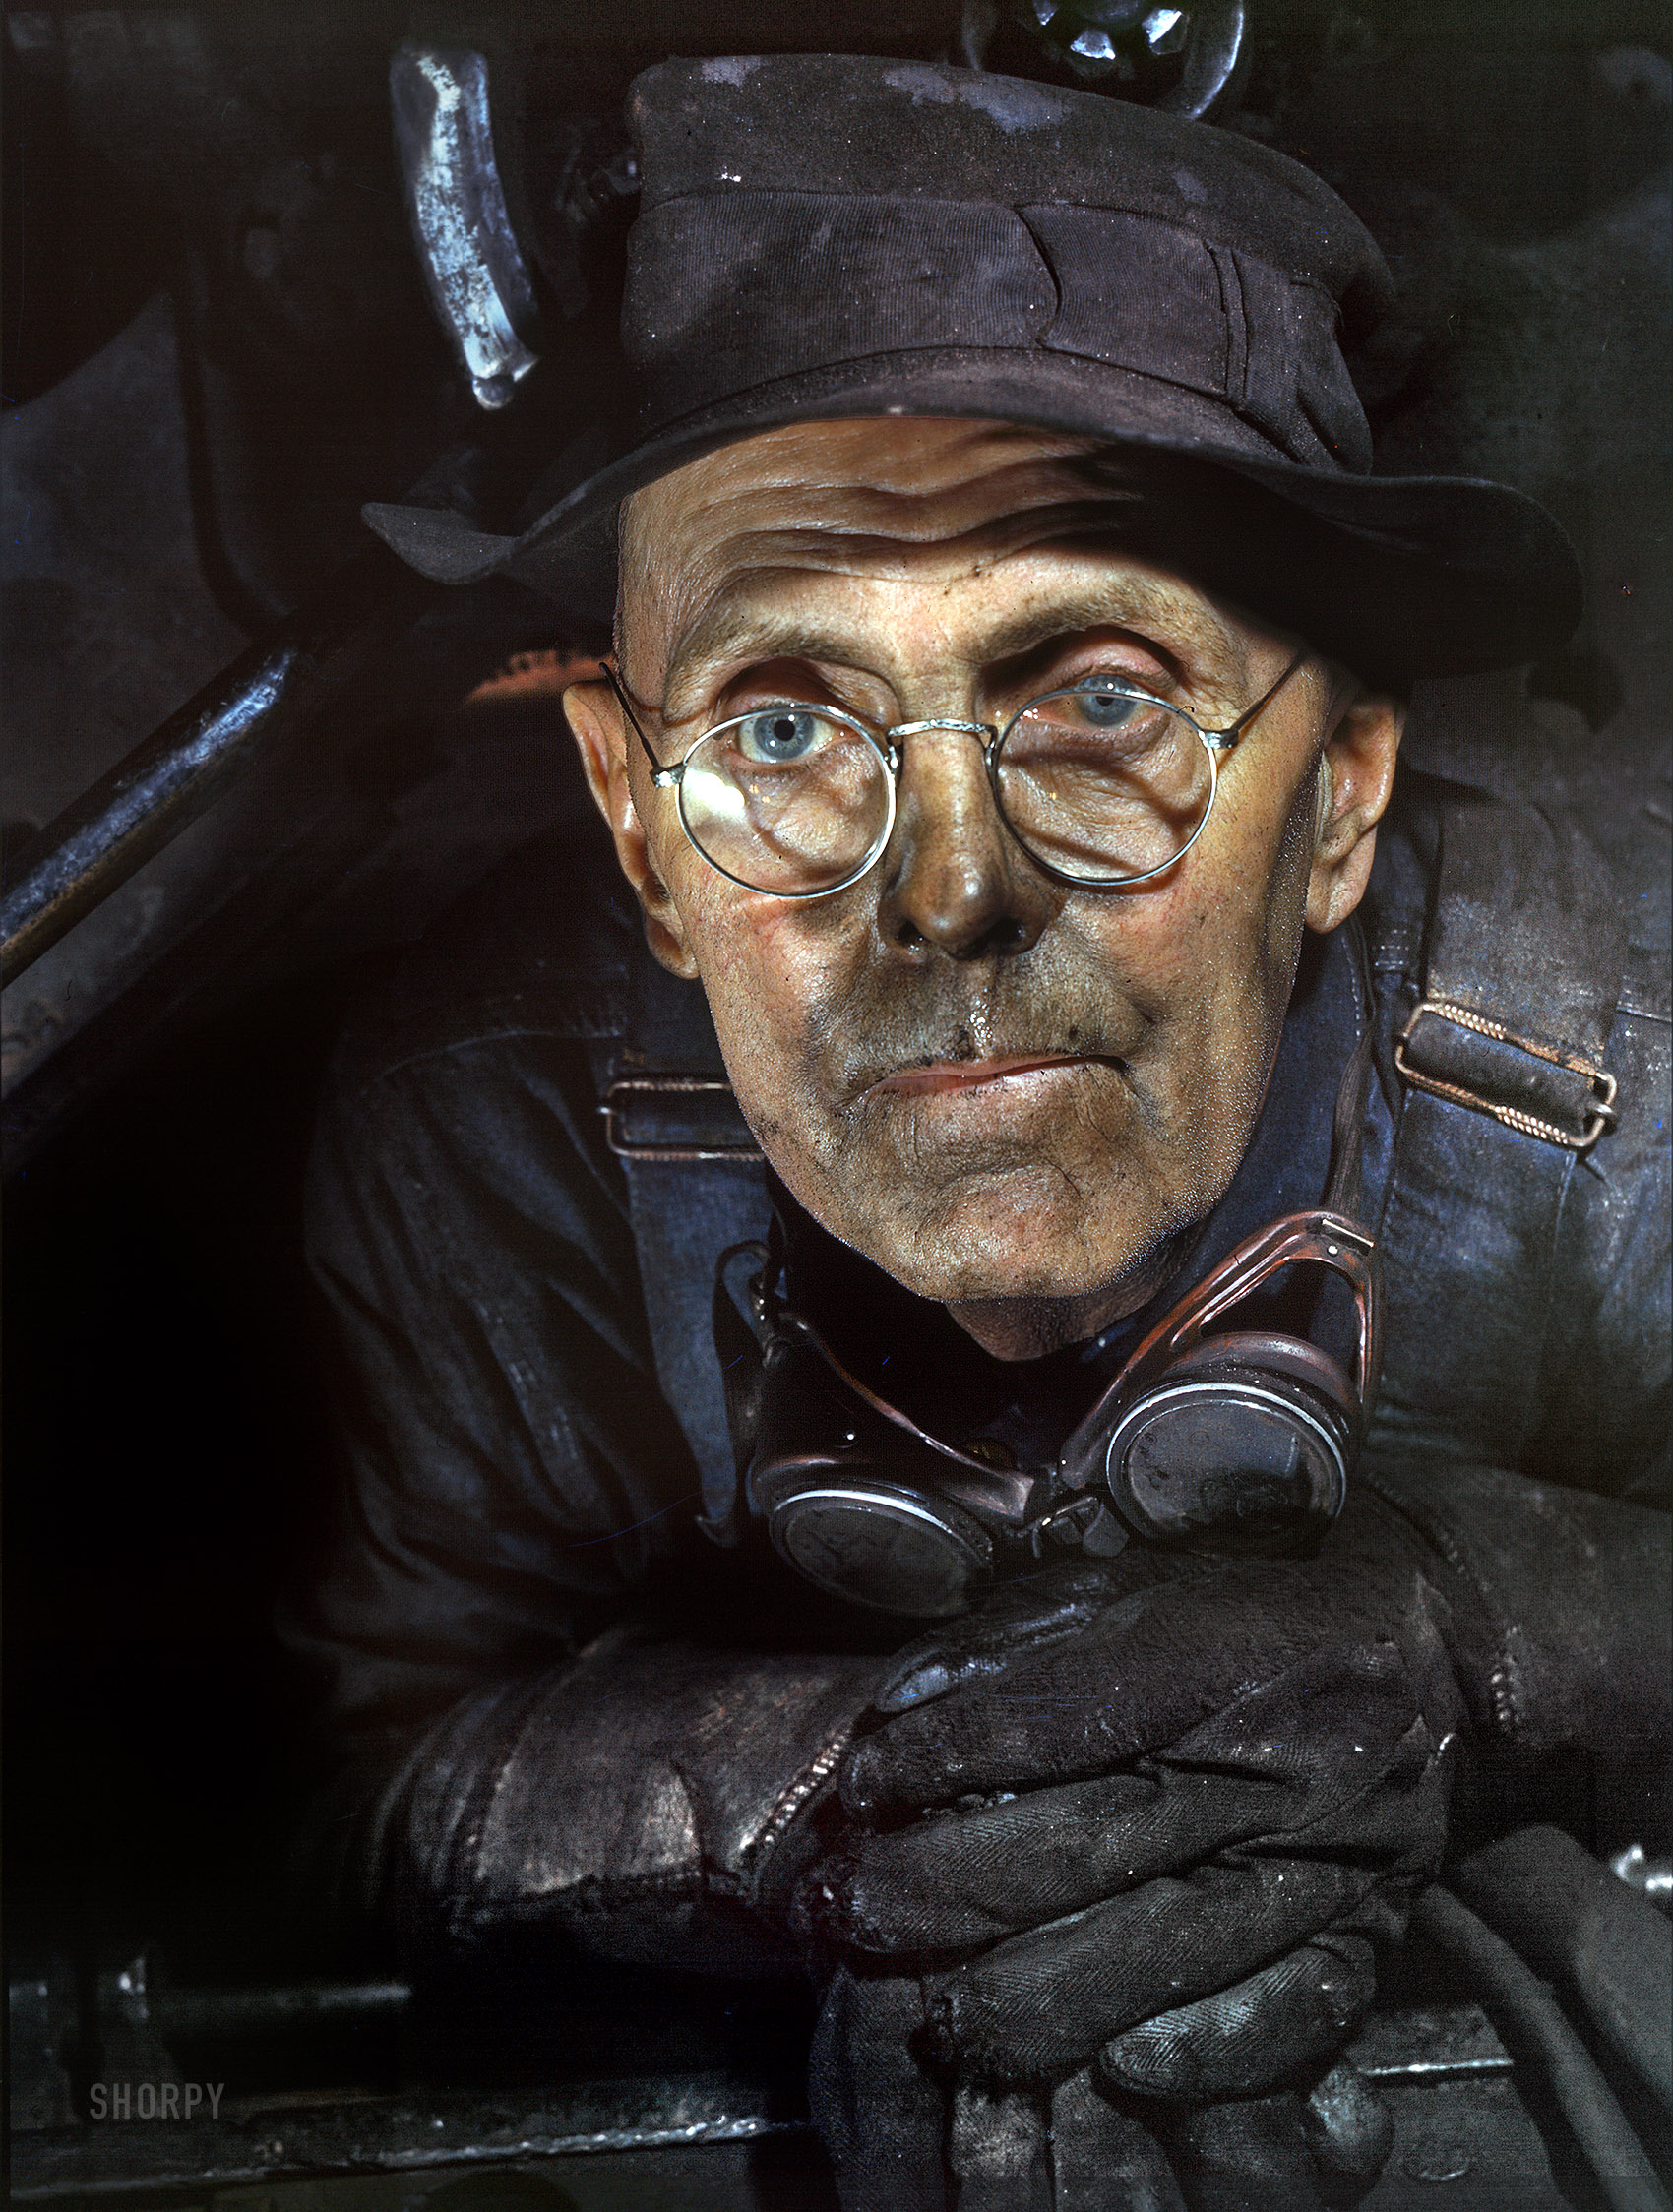 December 1942. Melrose Park, Ill. "L. Logan, of West Chicago, boilermaker at the Proviso Yard roundhouse, Chicago & North Western R.R." 4x5 Kodachrome transparency by Jack Delano, Office of War Information. View full size.